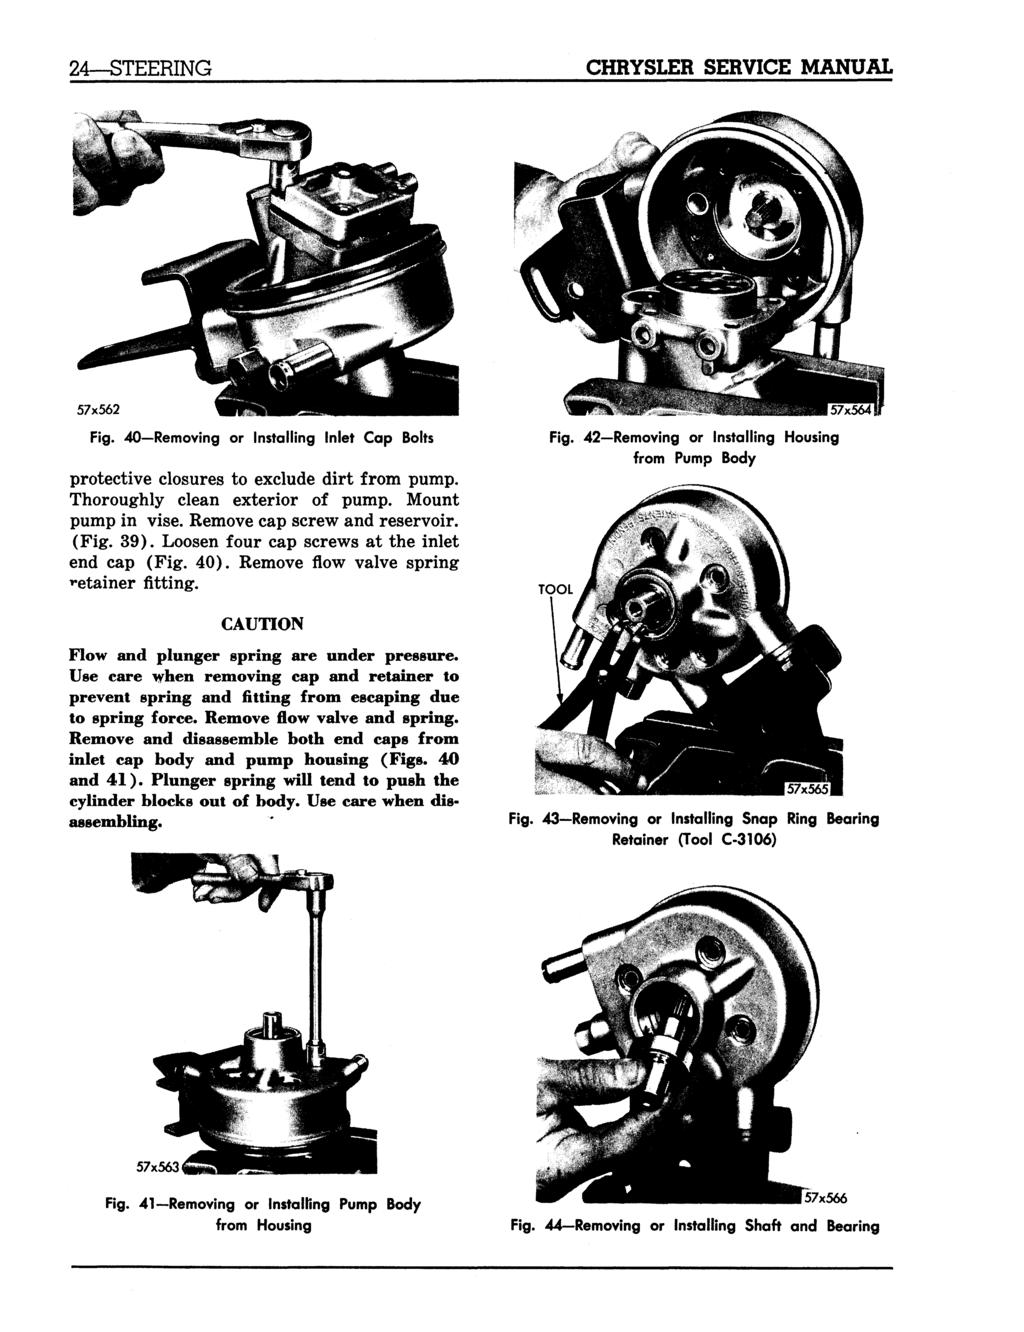 24 STEERING CHRYSLER SERVICE MANUAL 57x562 Fig. 40 Removing or Installing Inlet Cap Bolts protective closures to exclude dirt from pump. Thoroughly clean exterior of pump. Mount pump in vise.